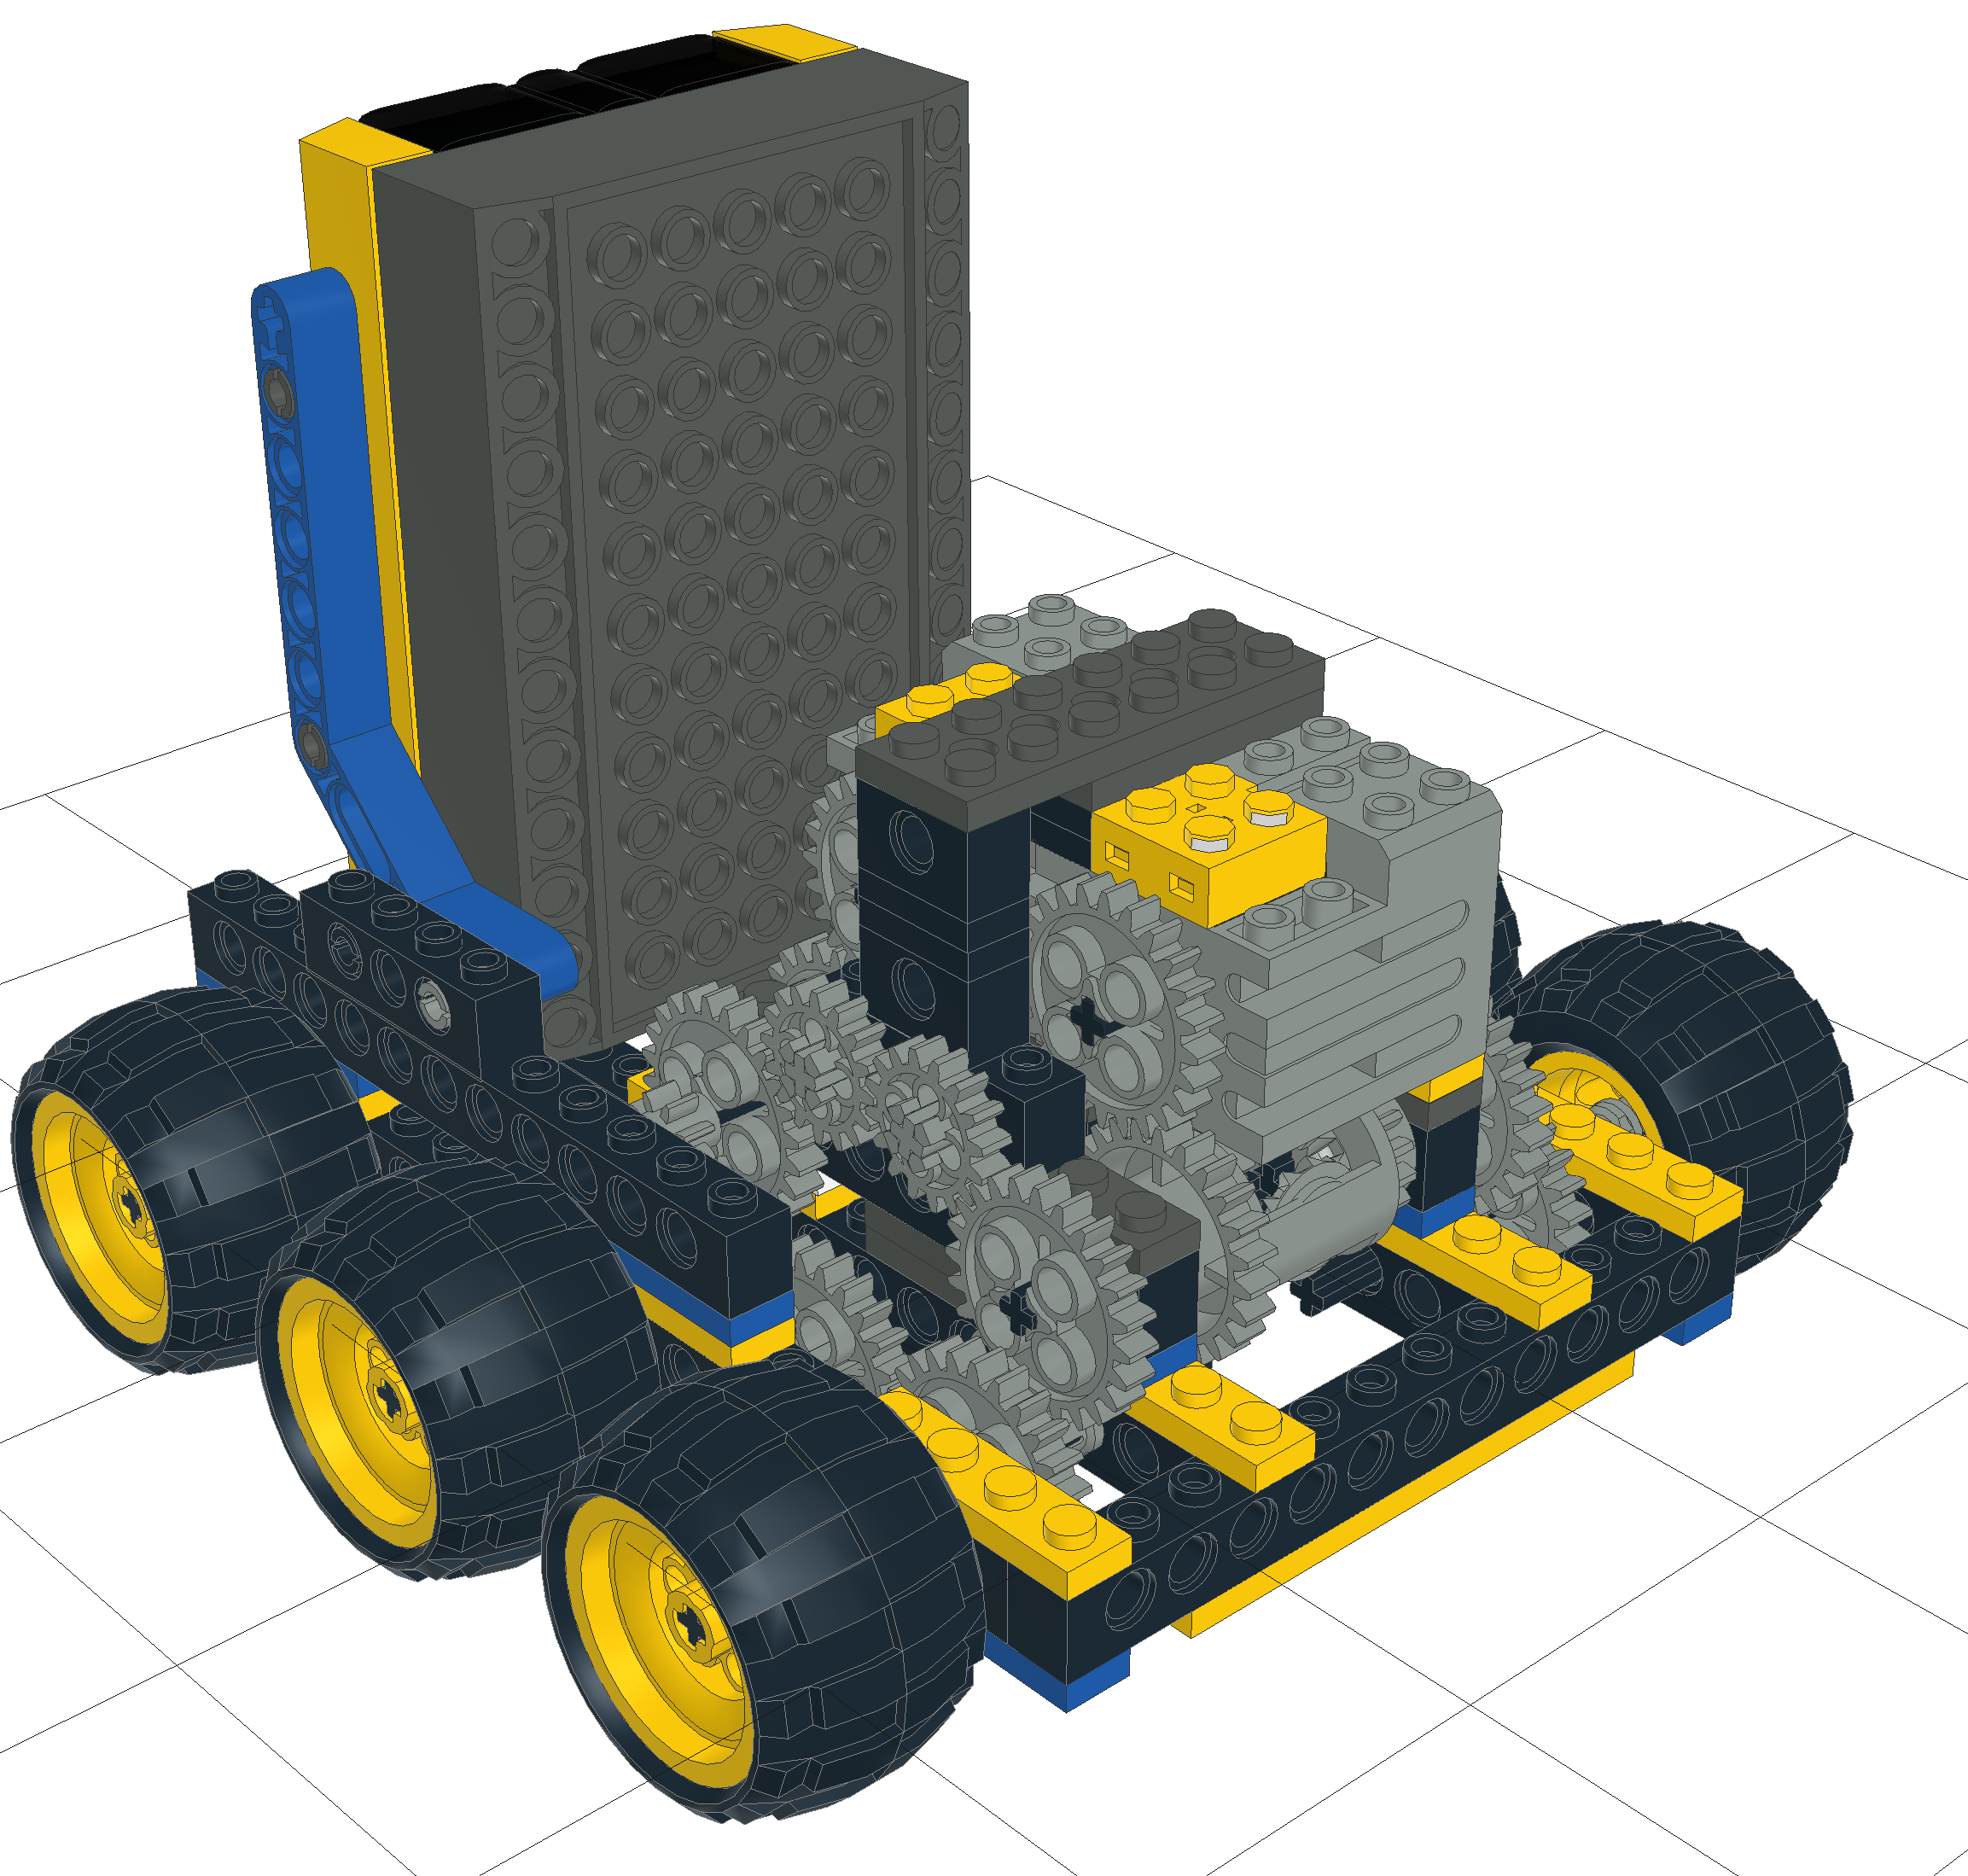 Lego RCX based buggy using the Adder Subtractor Drive Principle